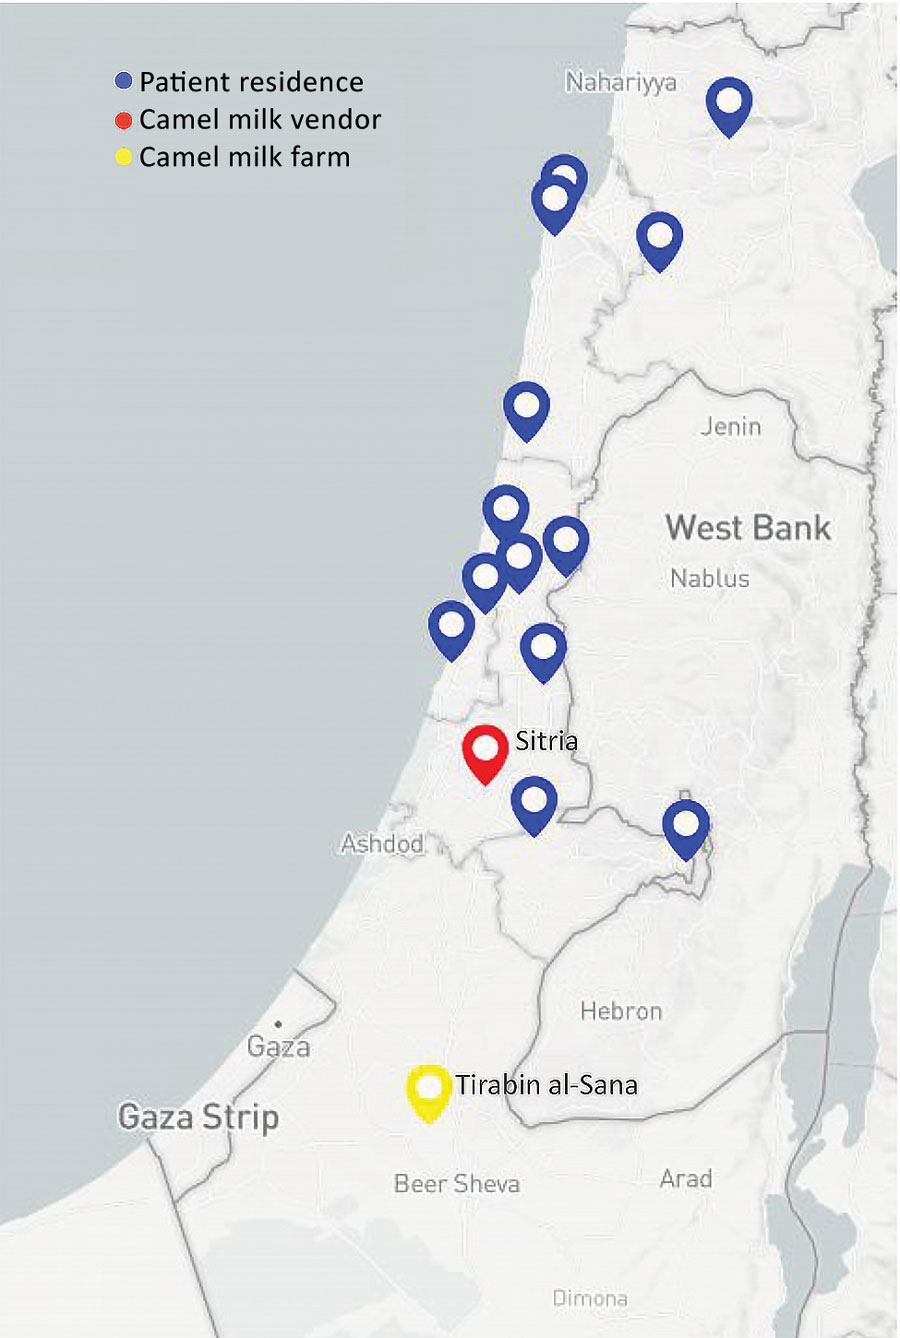 Geographic distribution of cases of Brucella melitensis traced to consumption of commercialized camel milk in Israel, 2016. Shown are the location of the camel farm in southern Israel from which raw milk was obtained), the vendor in central Israel that distributed the milk through direct online sales or other retail stores, and the places of residence of individual case-patients linked to the outbreak.